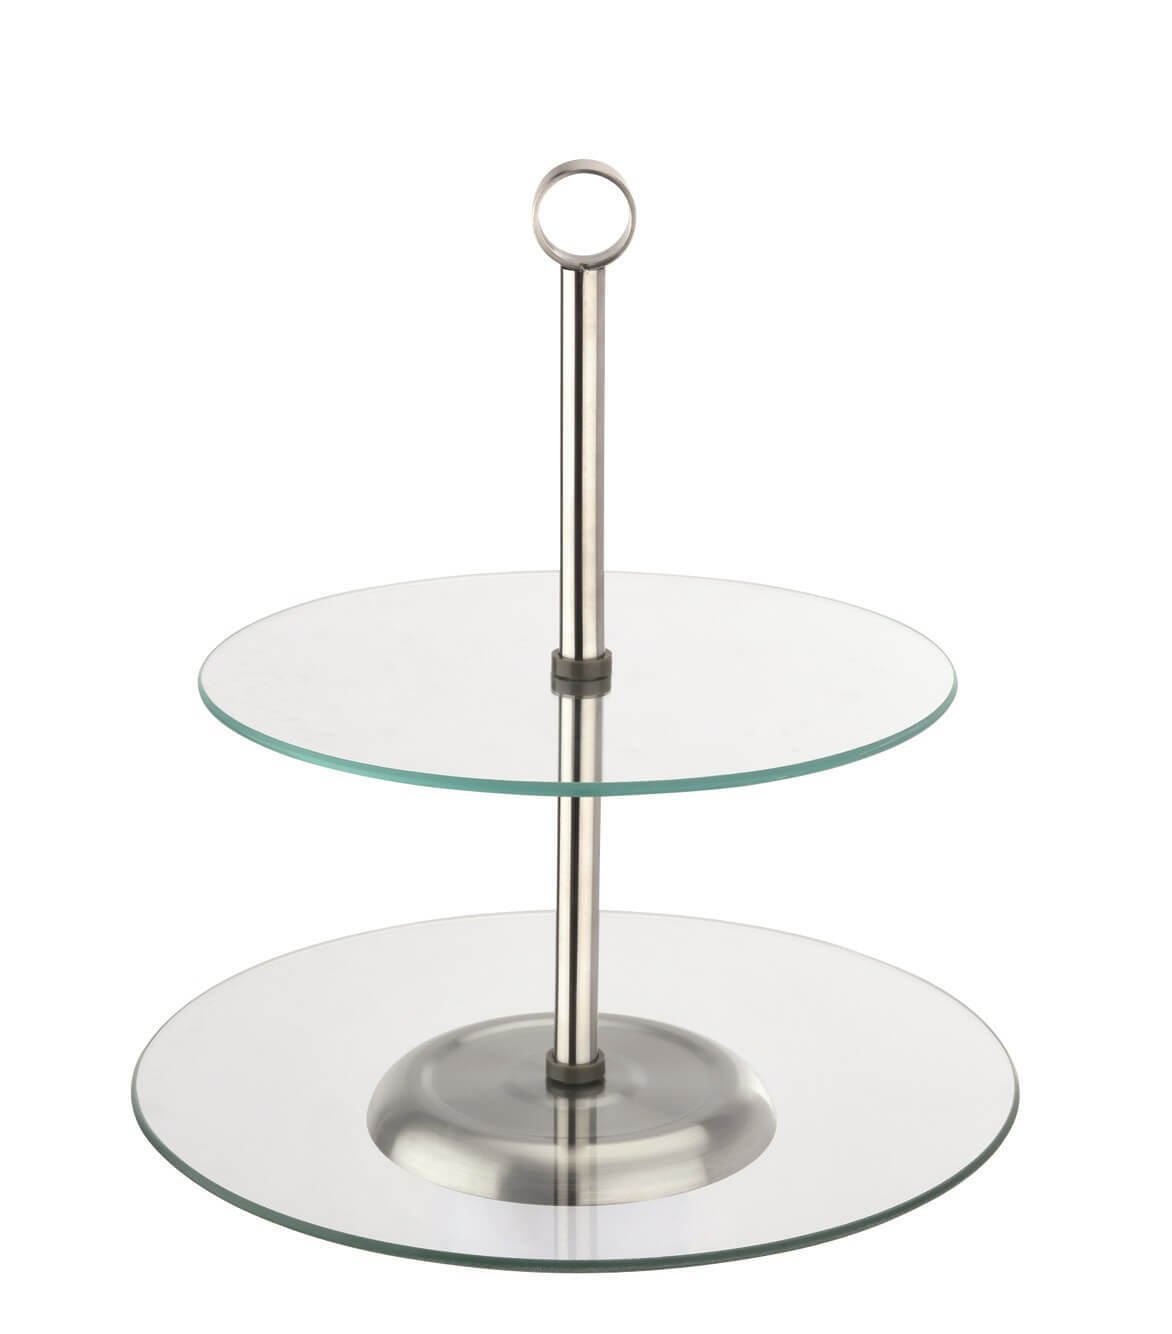 Two-level glass stands 6319002